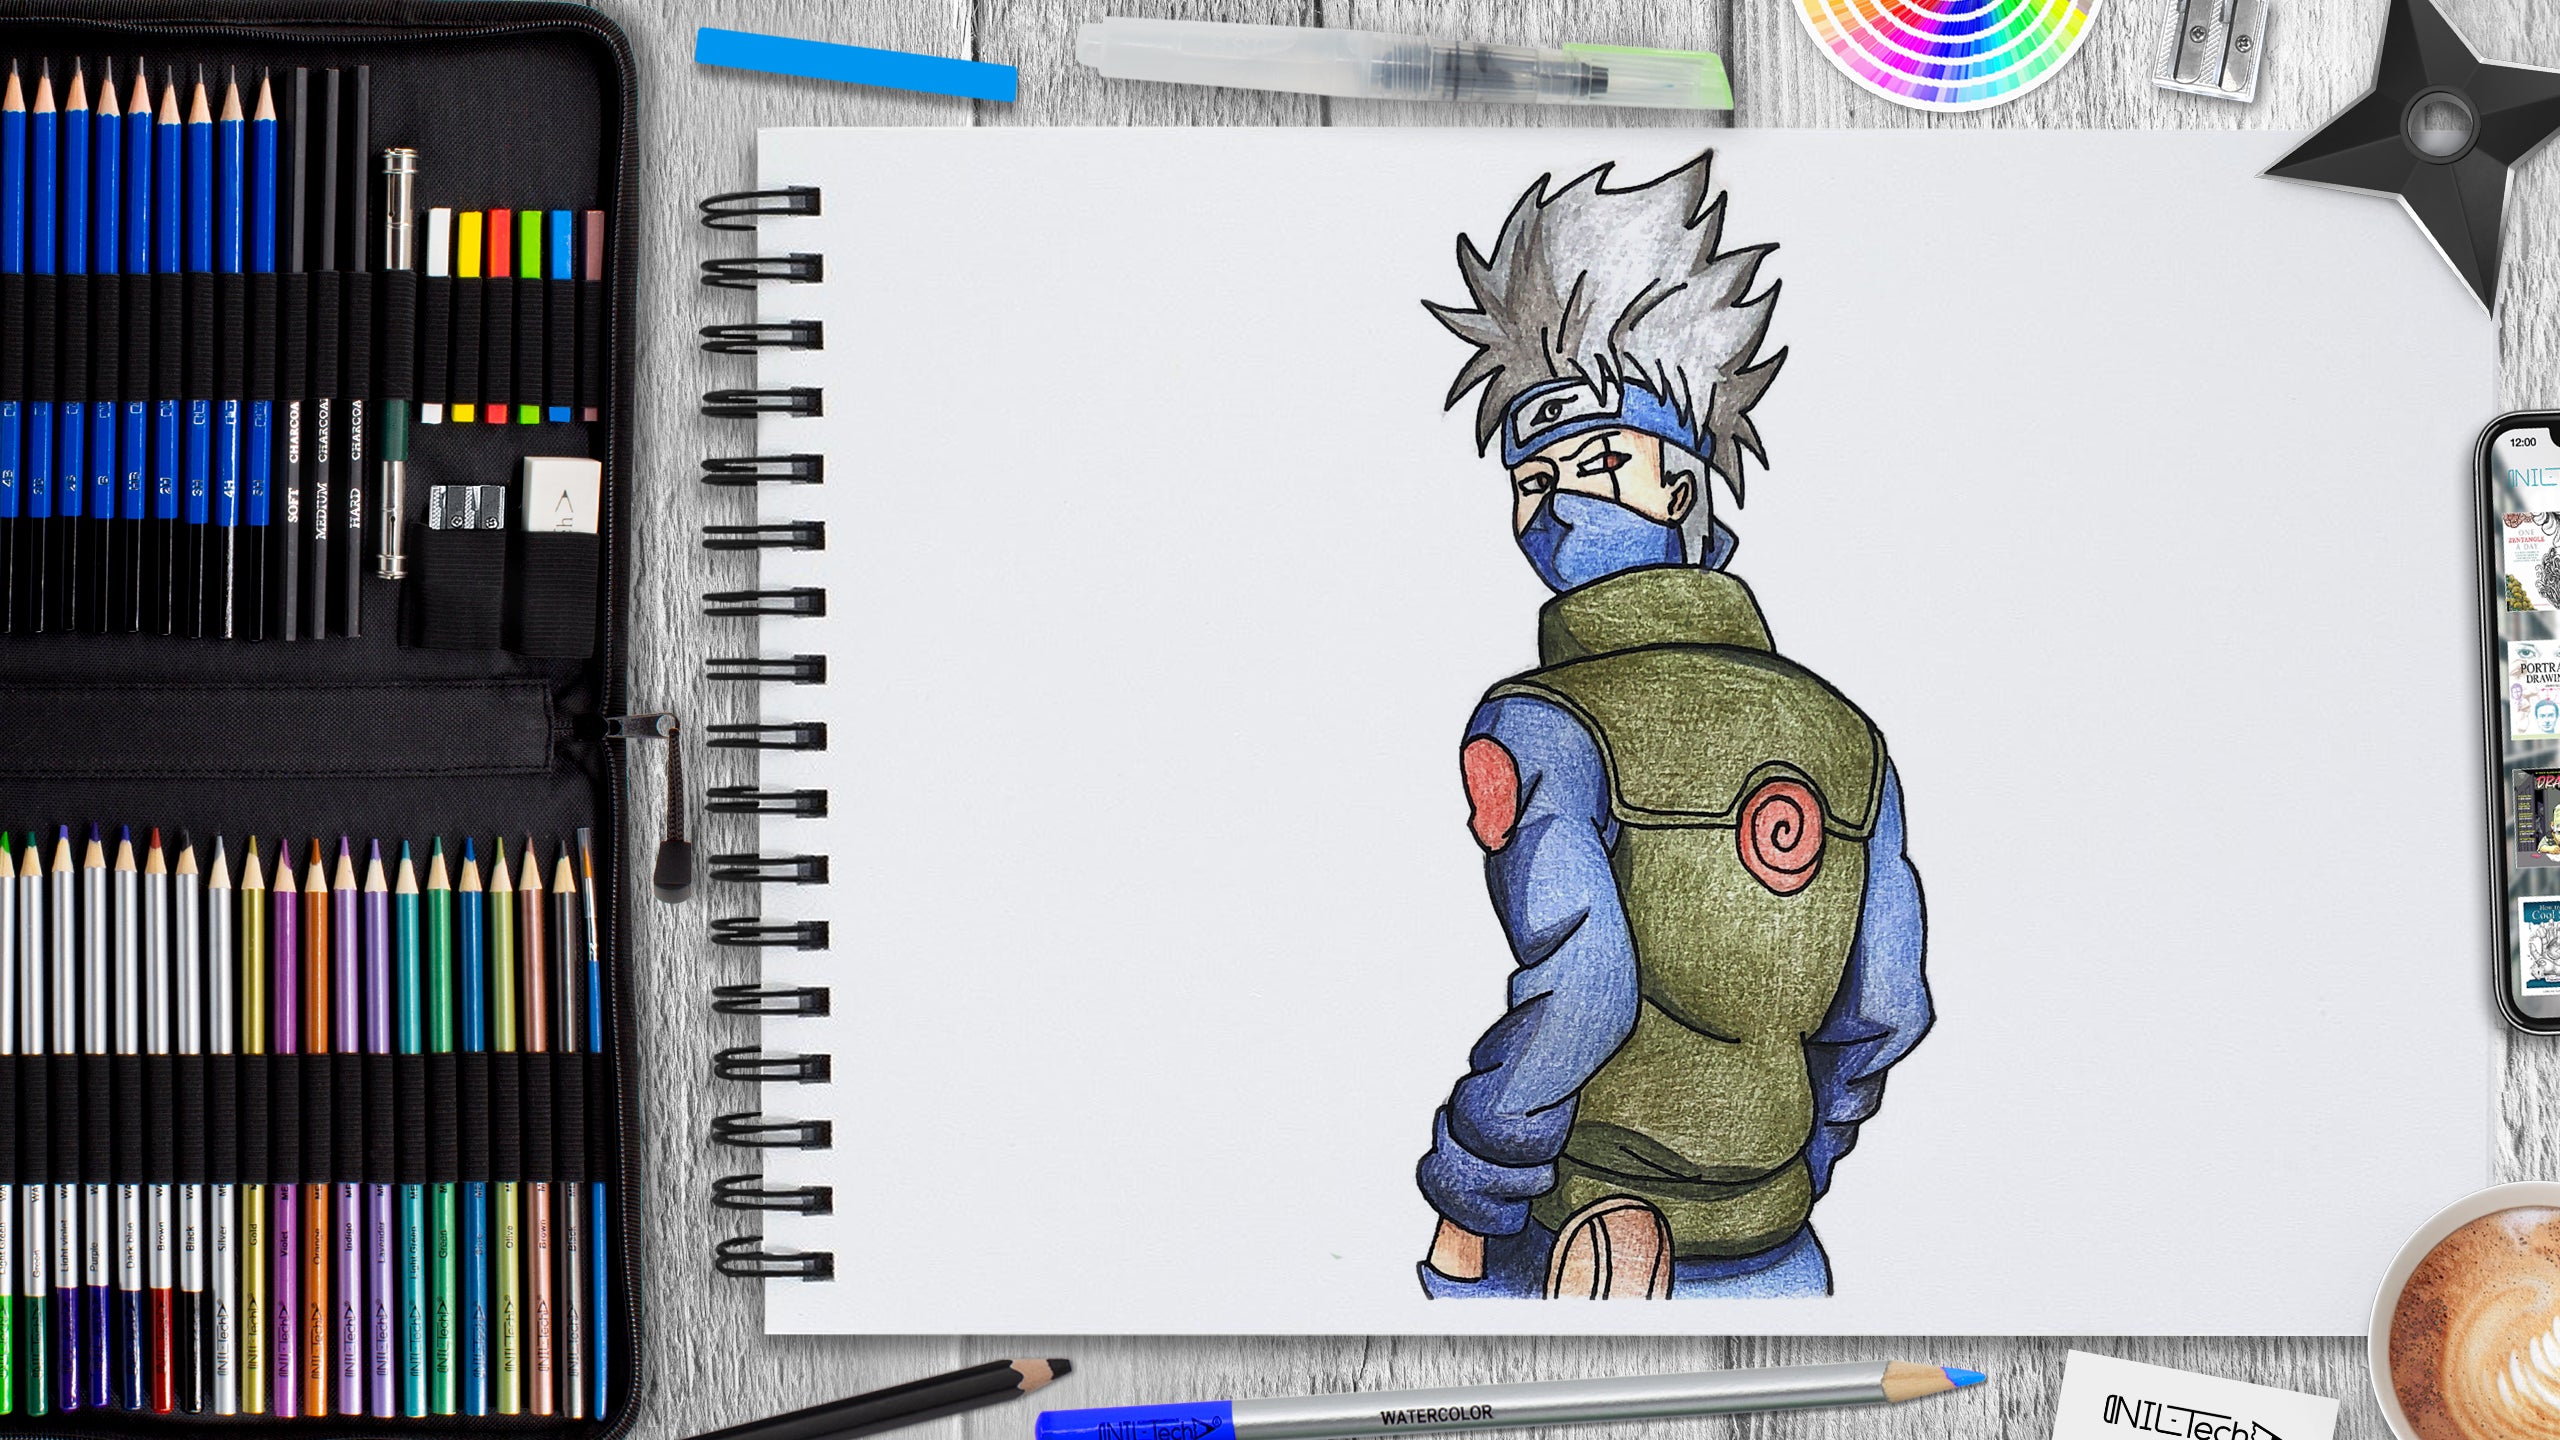 how to draw Naruto Uzumaki step-by-step using just a pencil